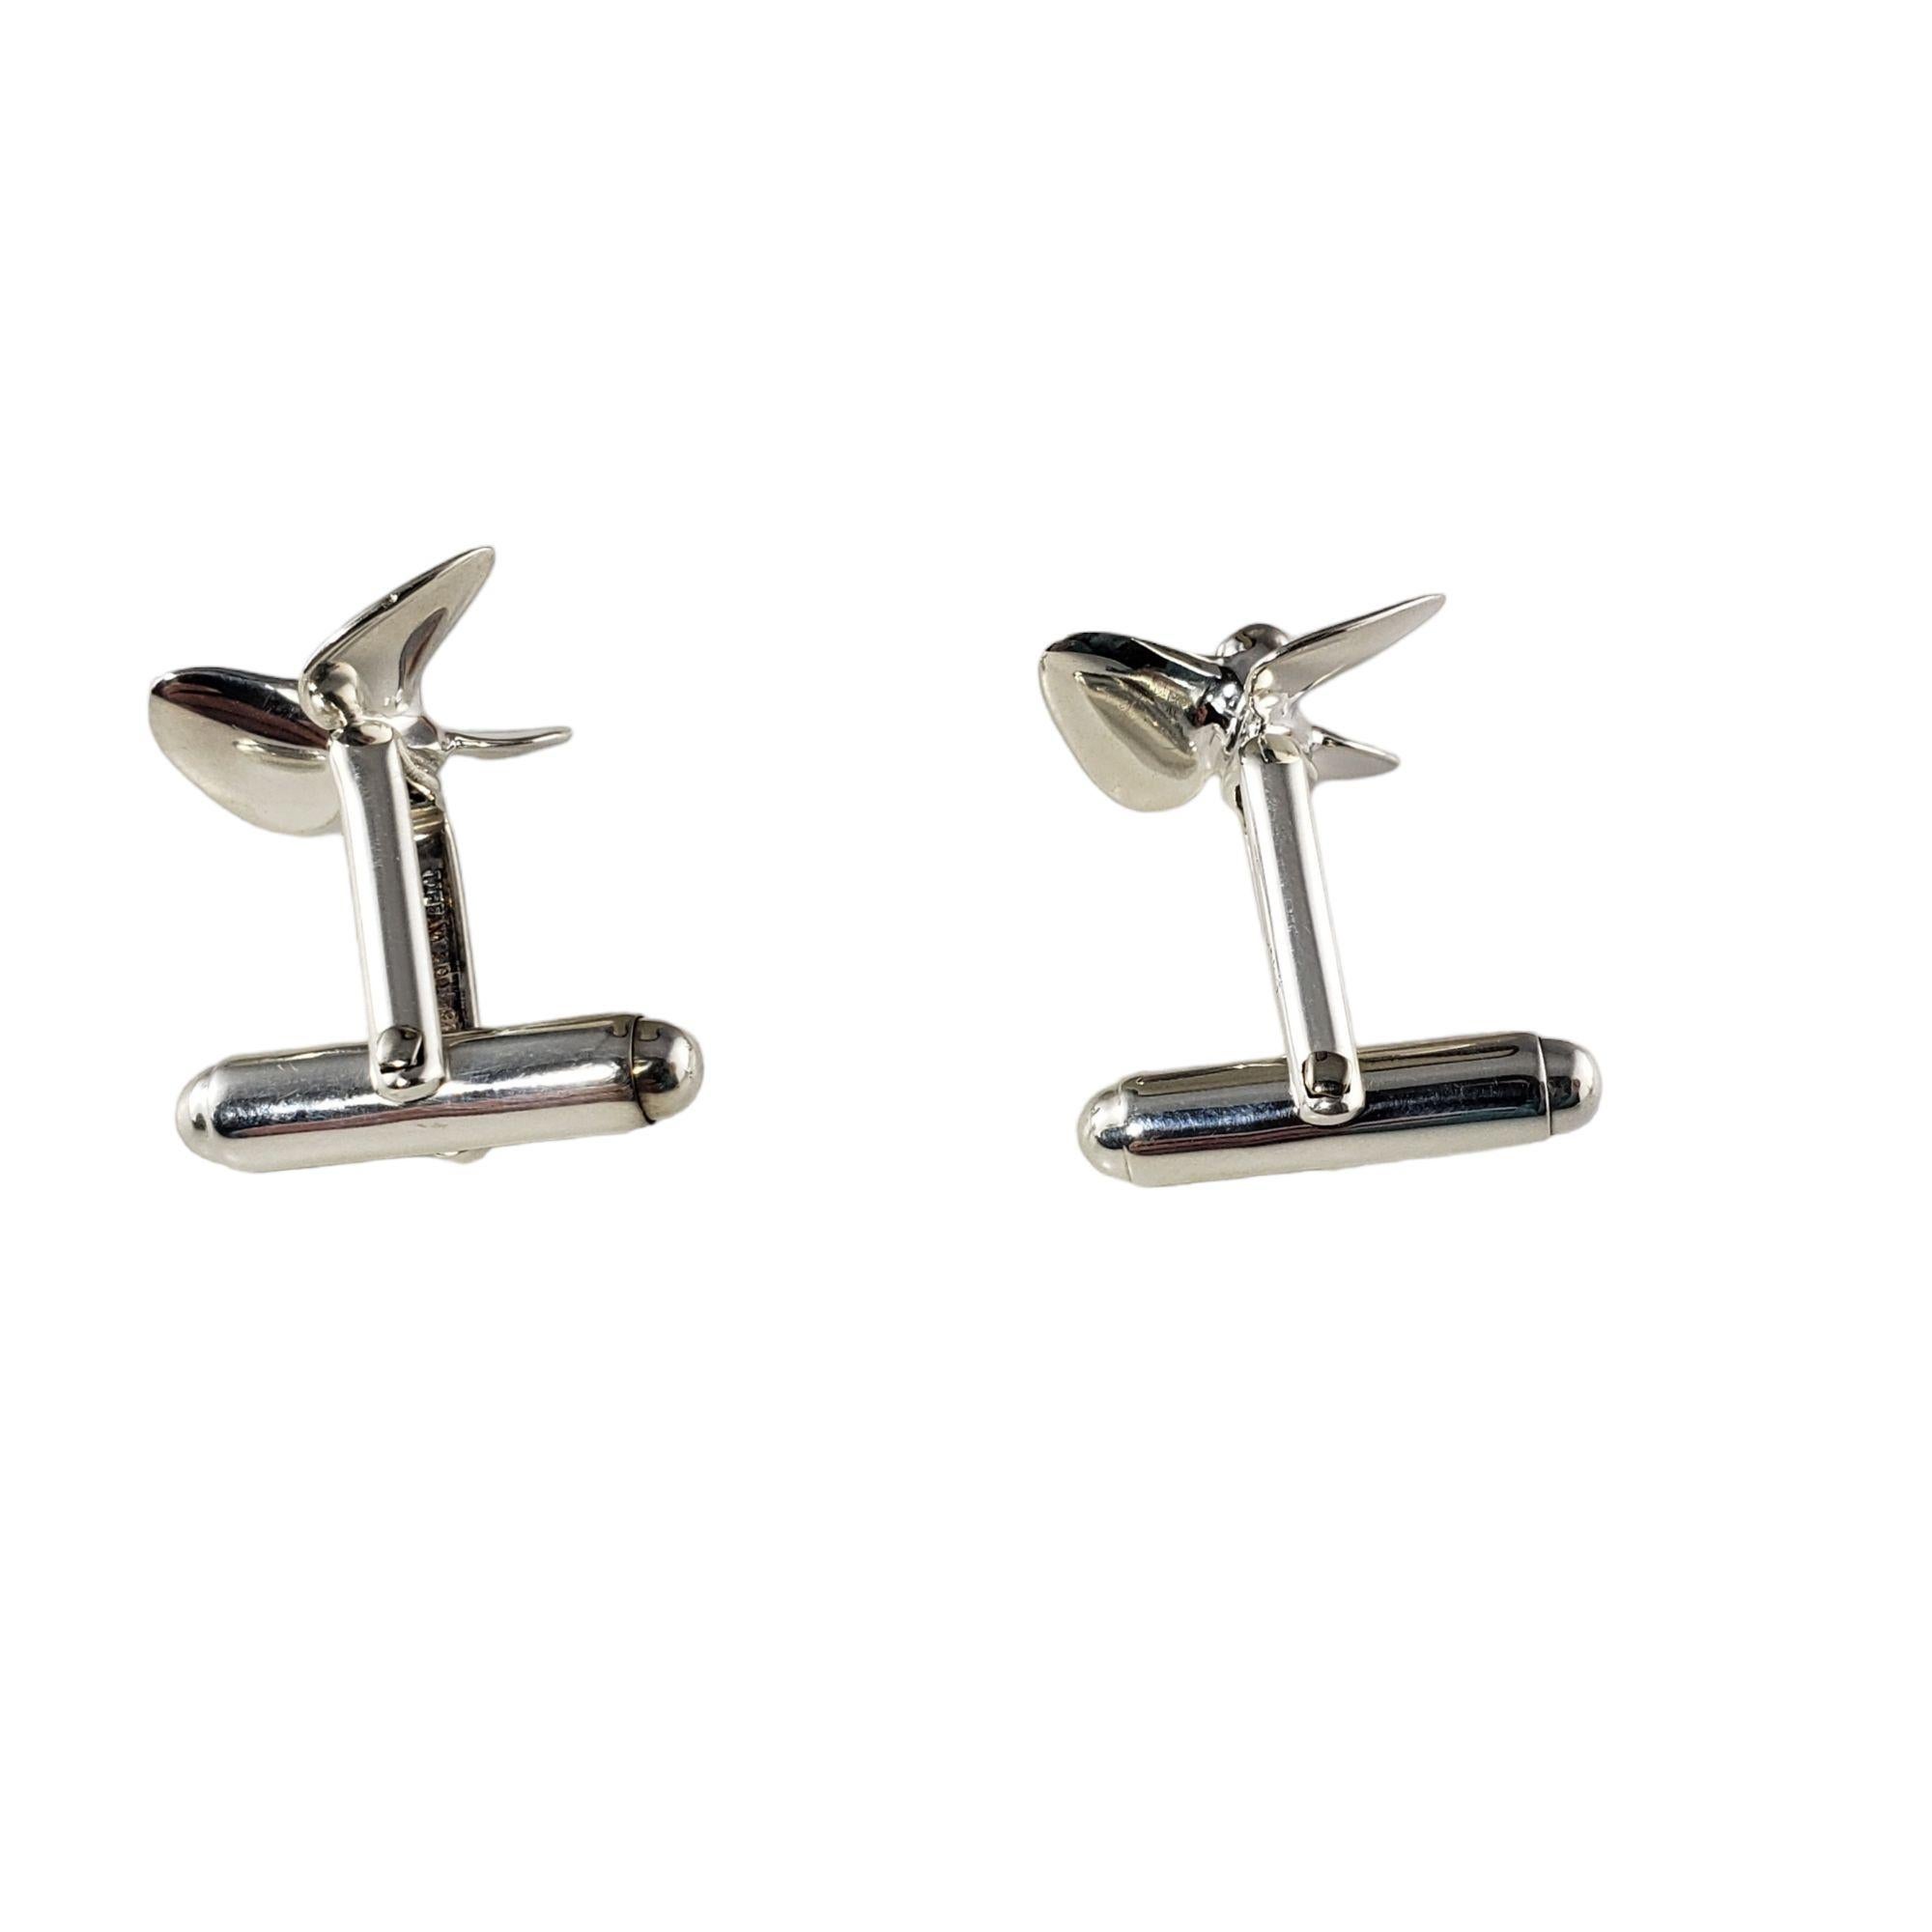 Vintage Tiffany & Co. Sterling Silver Boat Propeller Cufflinks-

These elegant boat propeller cufflinks by Tiffany and Co. are crafted in meticulously detailed sterling silver.

Size: 15 mm

Weight: 6.2 gr./ 3.9 dwt.

Hallmark: TIFFANY & CO.